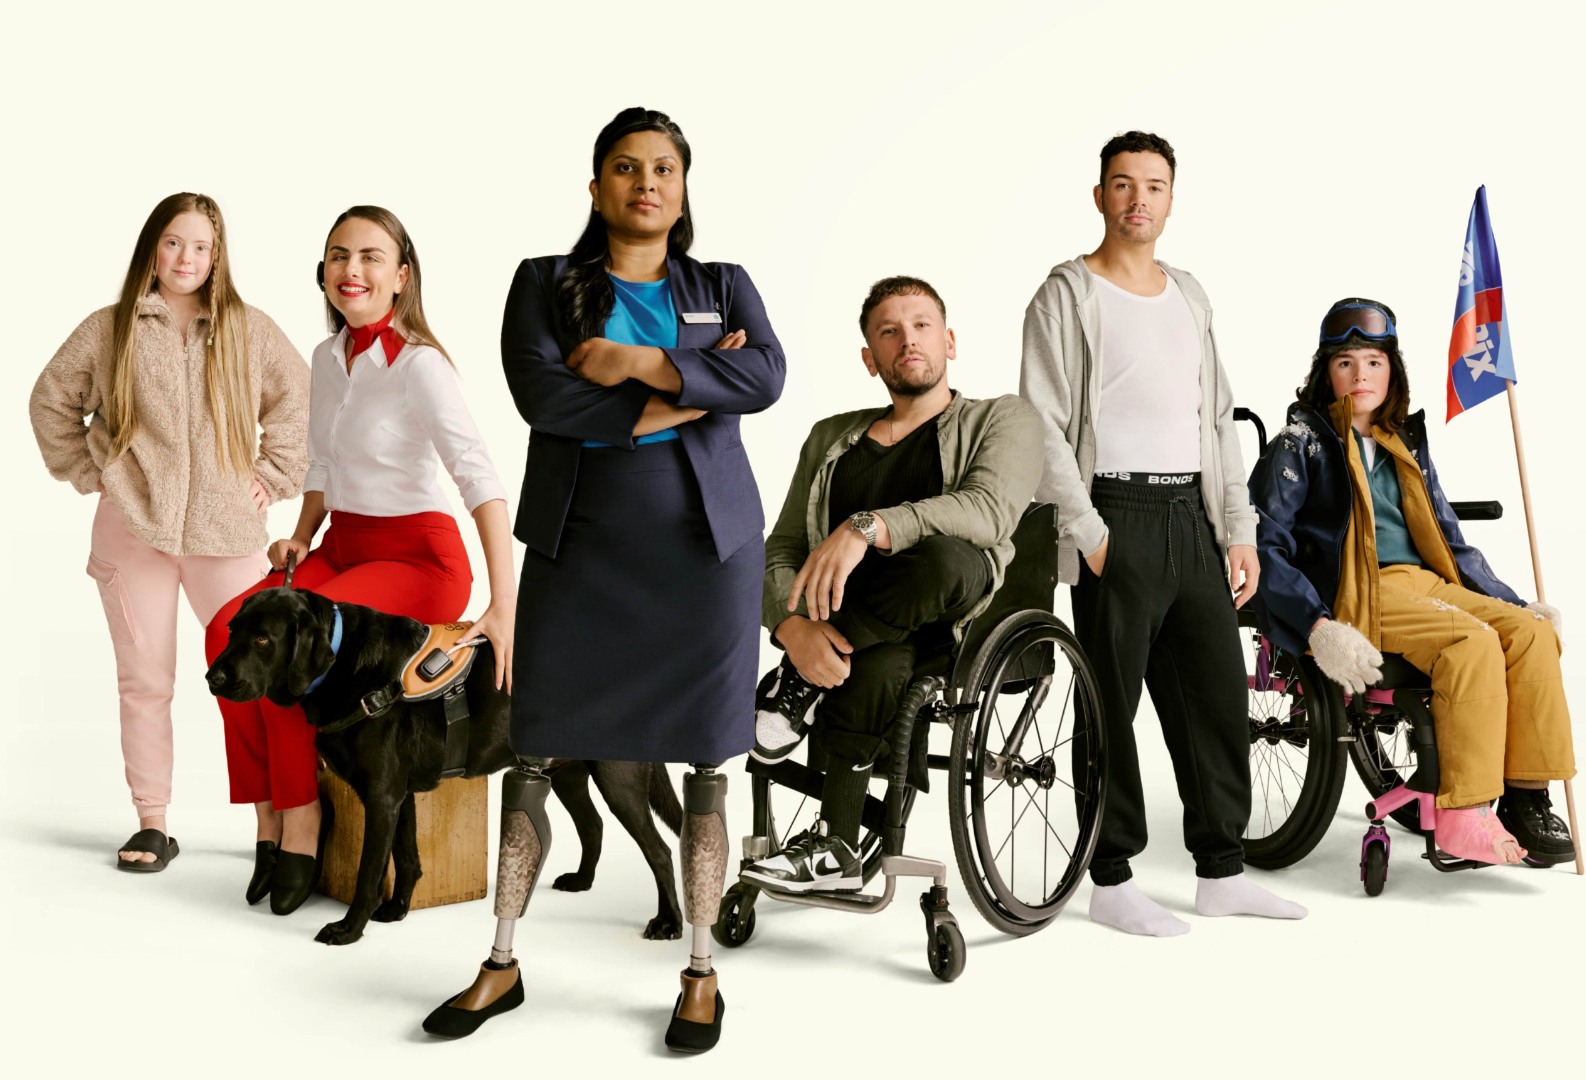 Dylan Alcott is side by side with a group of individuals who each have disability. All of these people are wearing the same clothes they wore in the television commercials they were featured in.